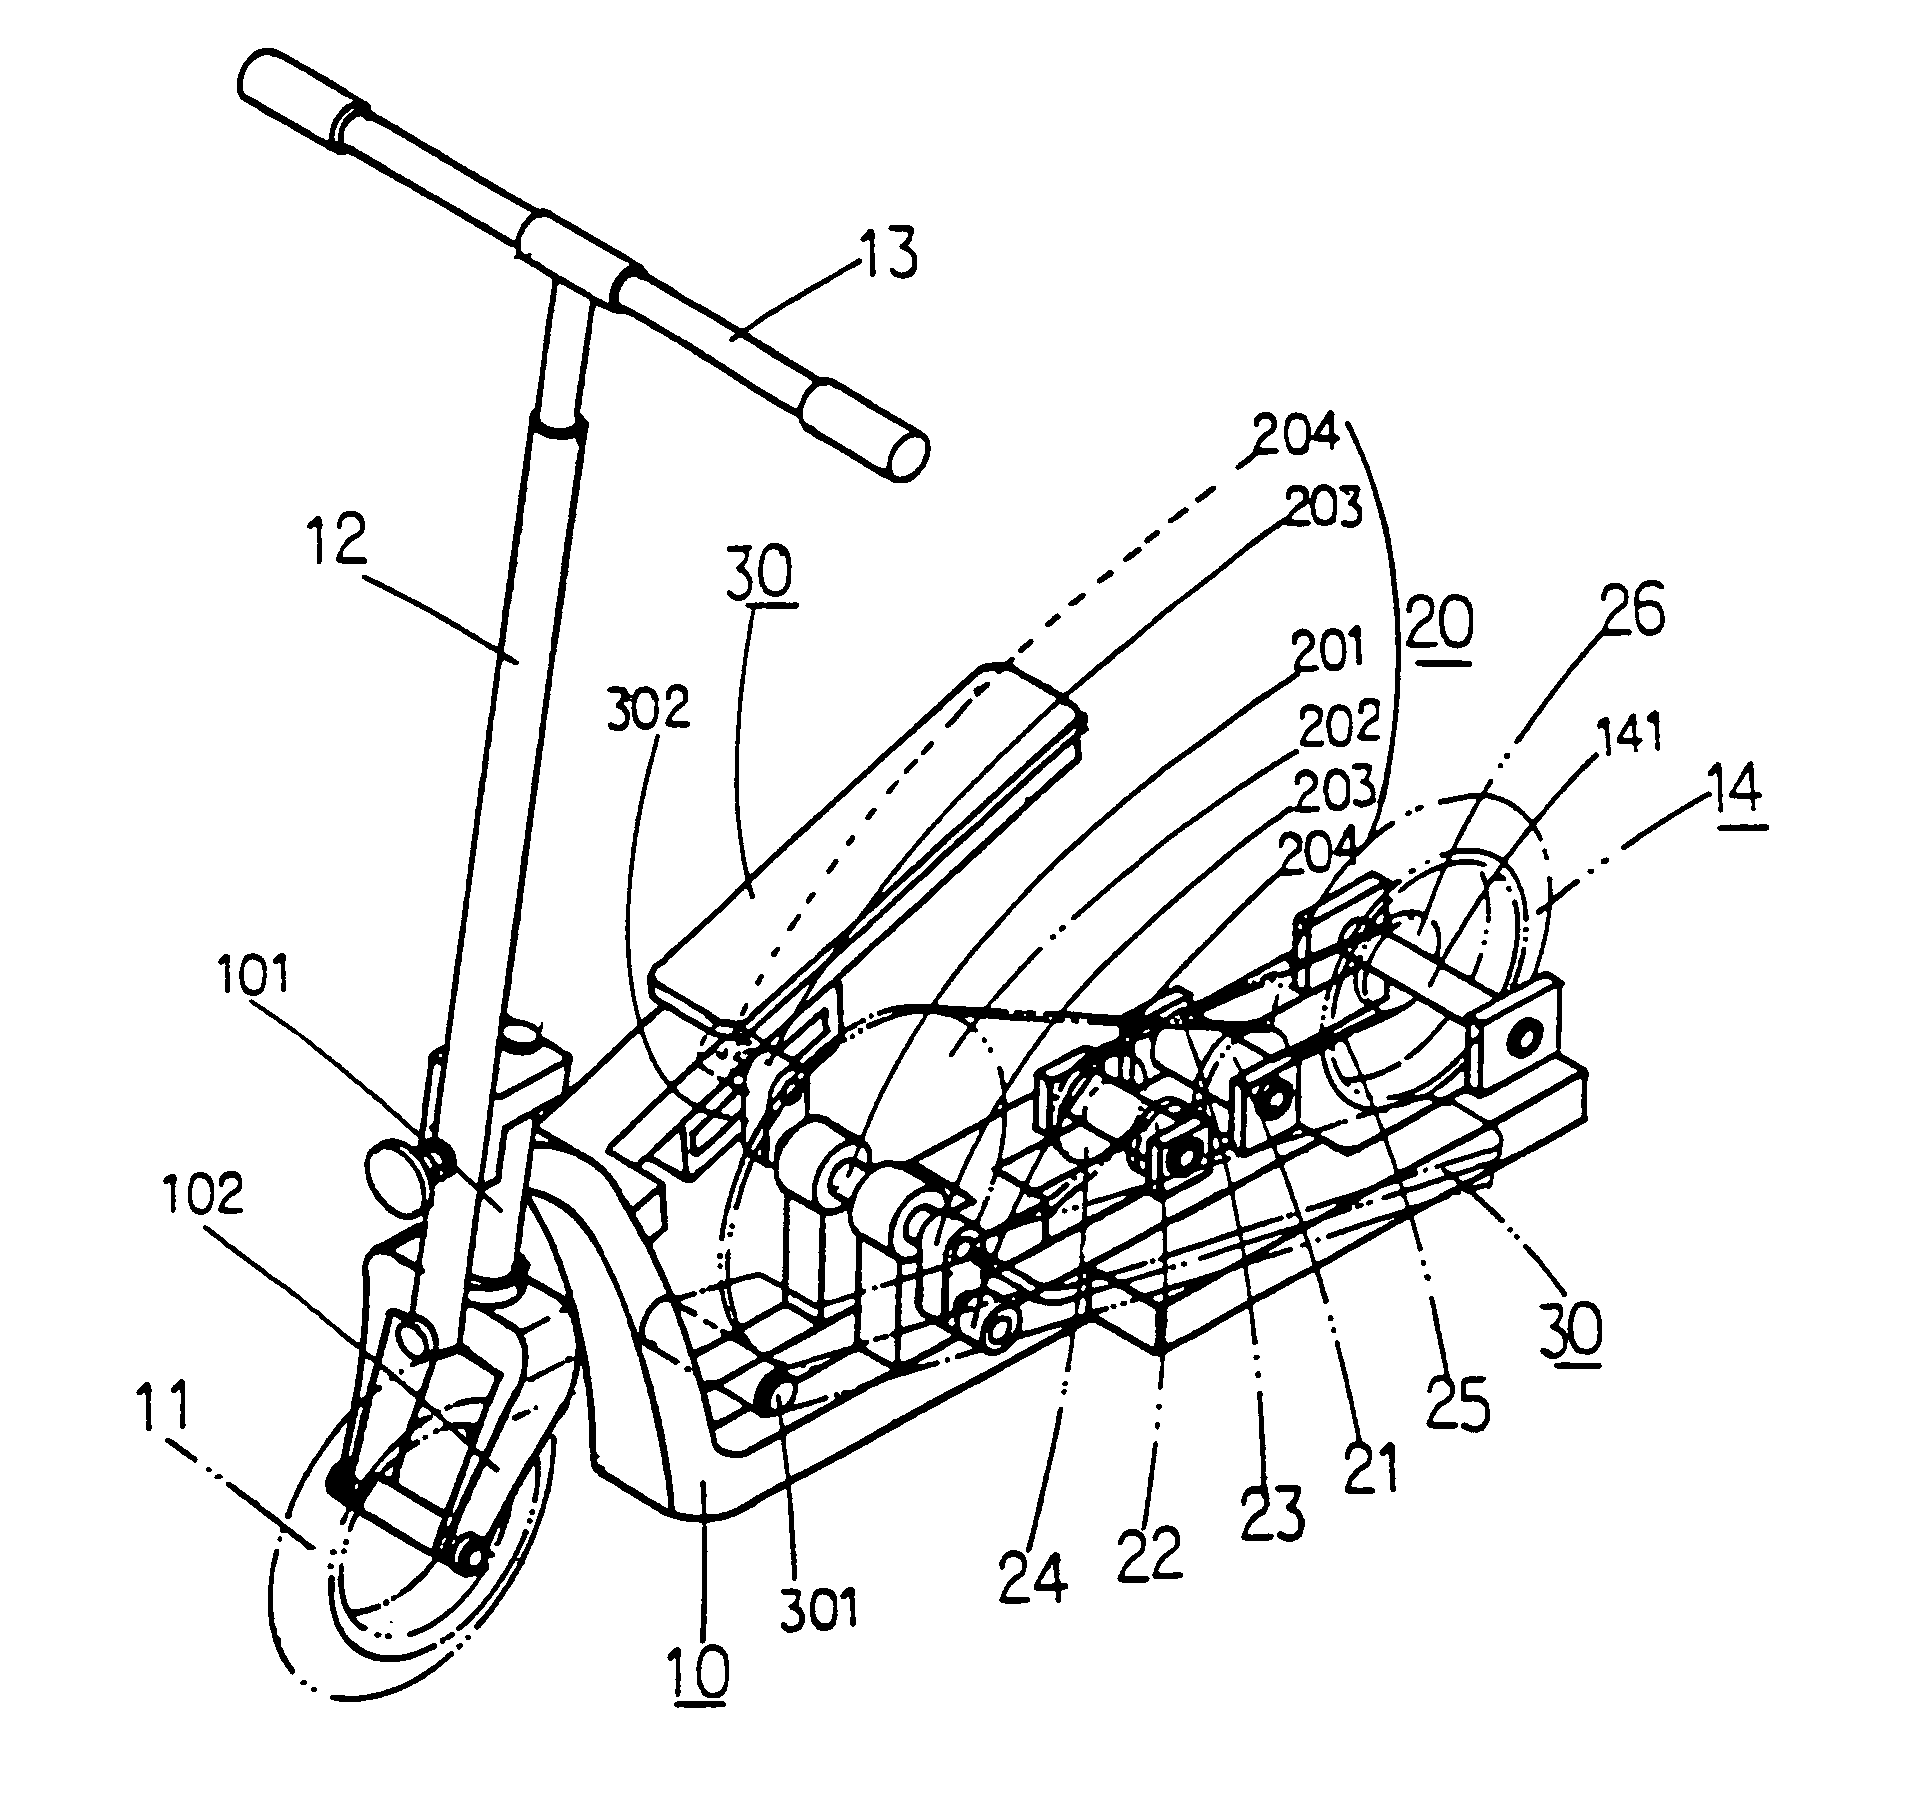 Rear-pedaling standing type bicycle structure